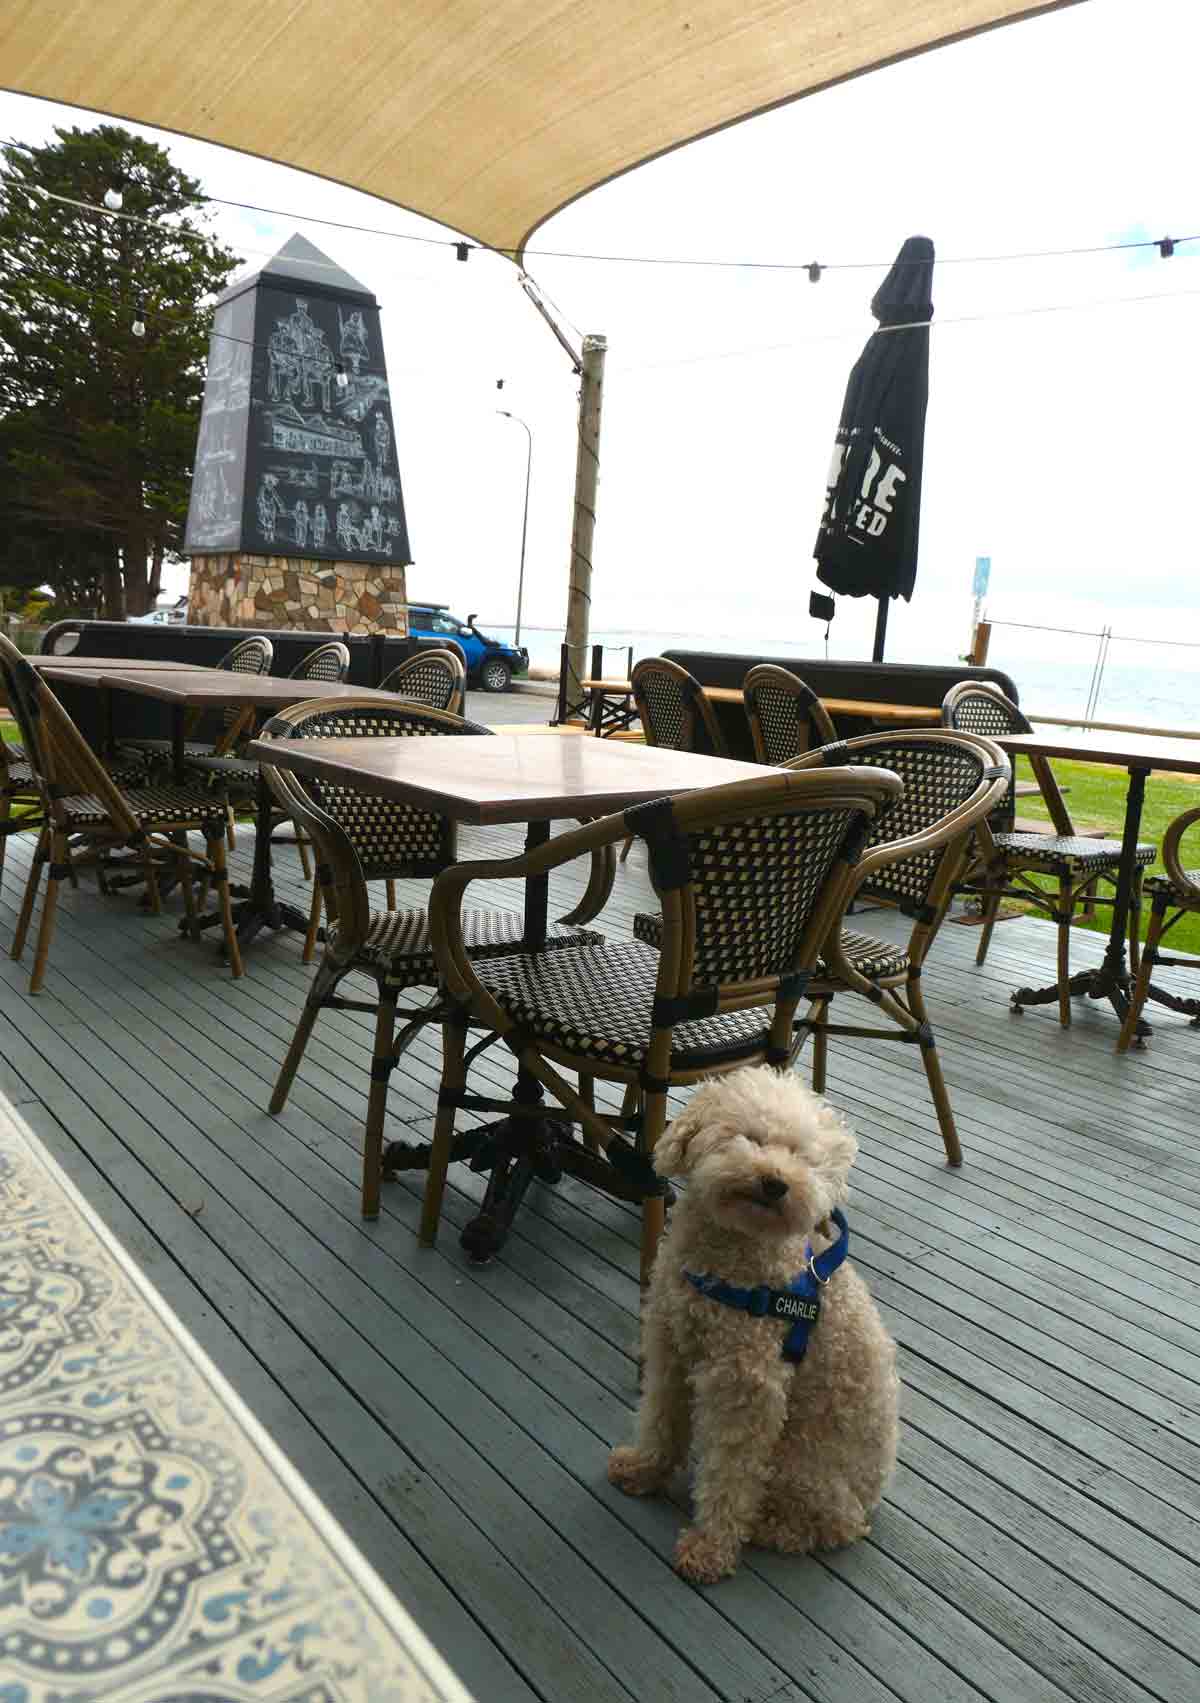 Charlie at BlueWater Cafe outdoor deck area. Located in Tumby Bay, Eyre Peninsula, South Australia.